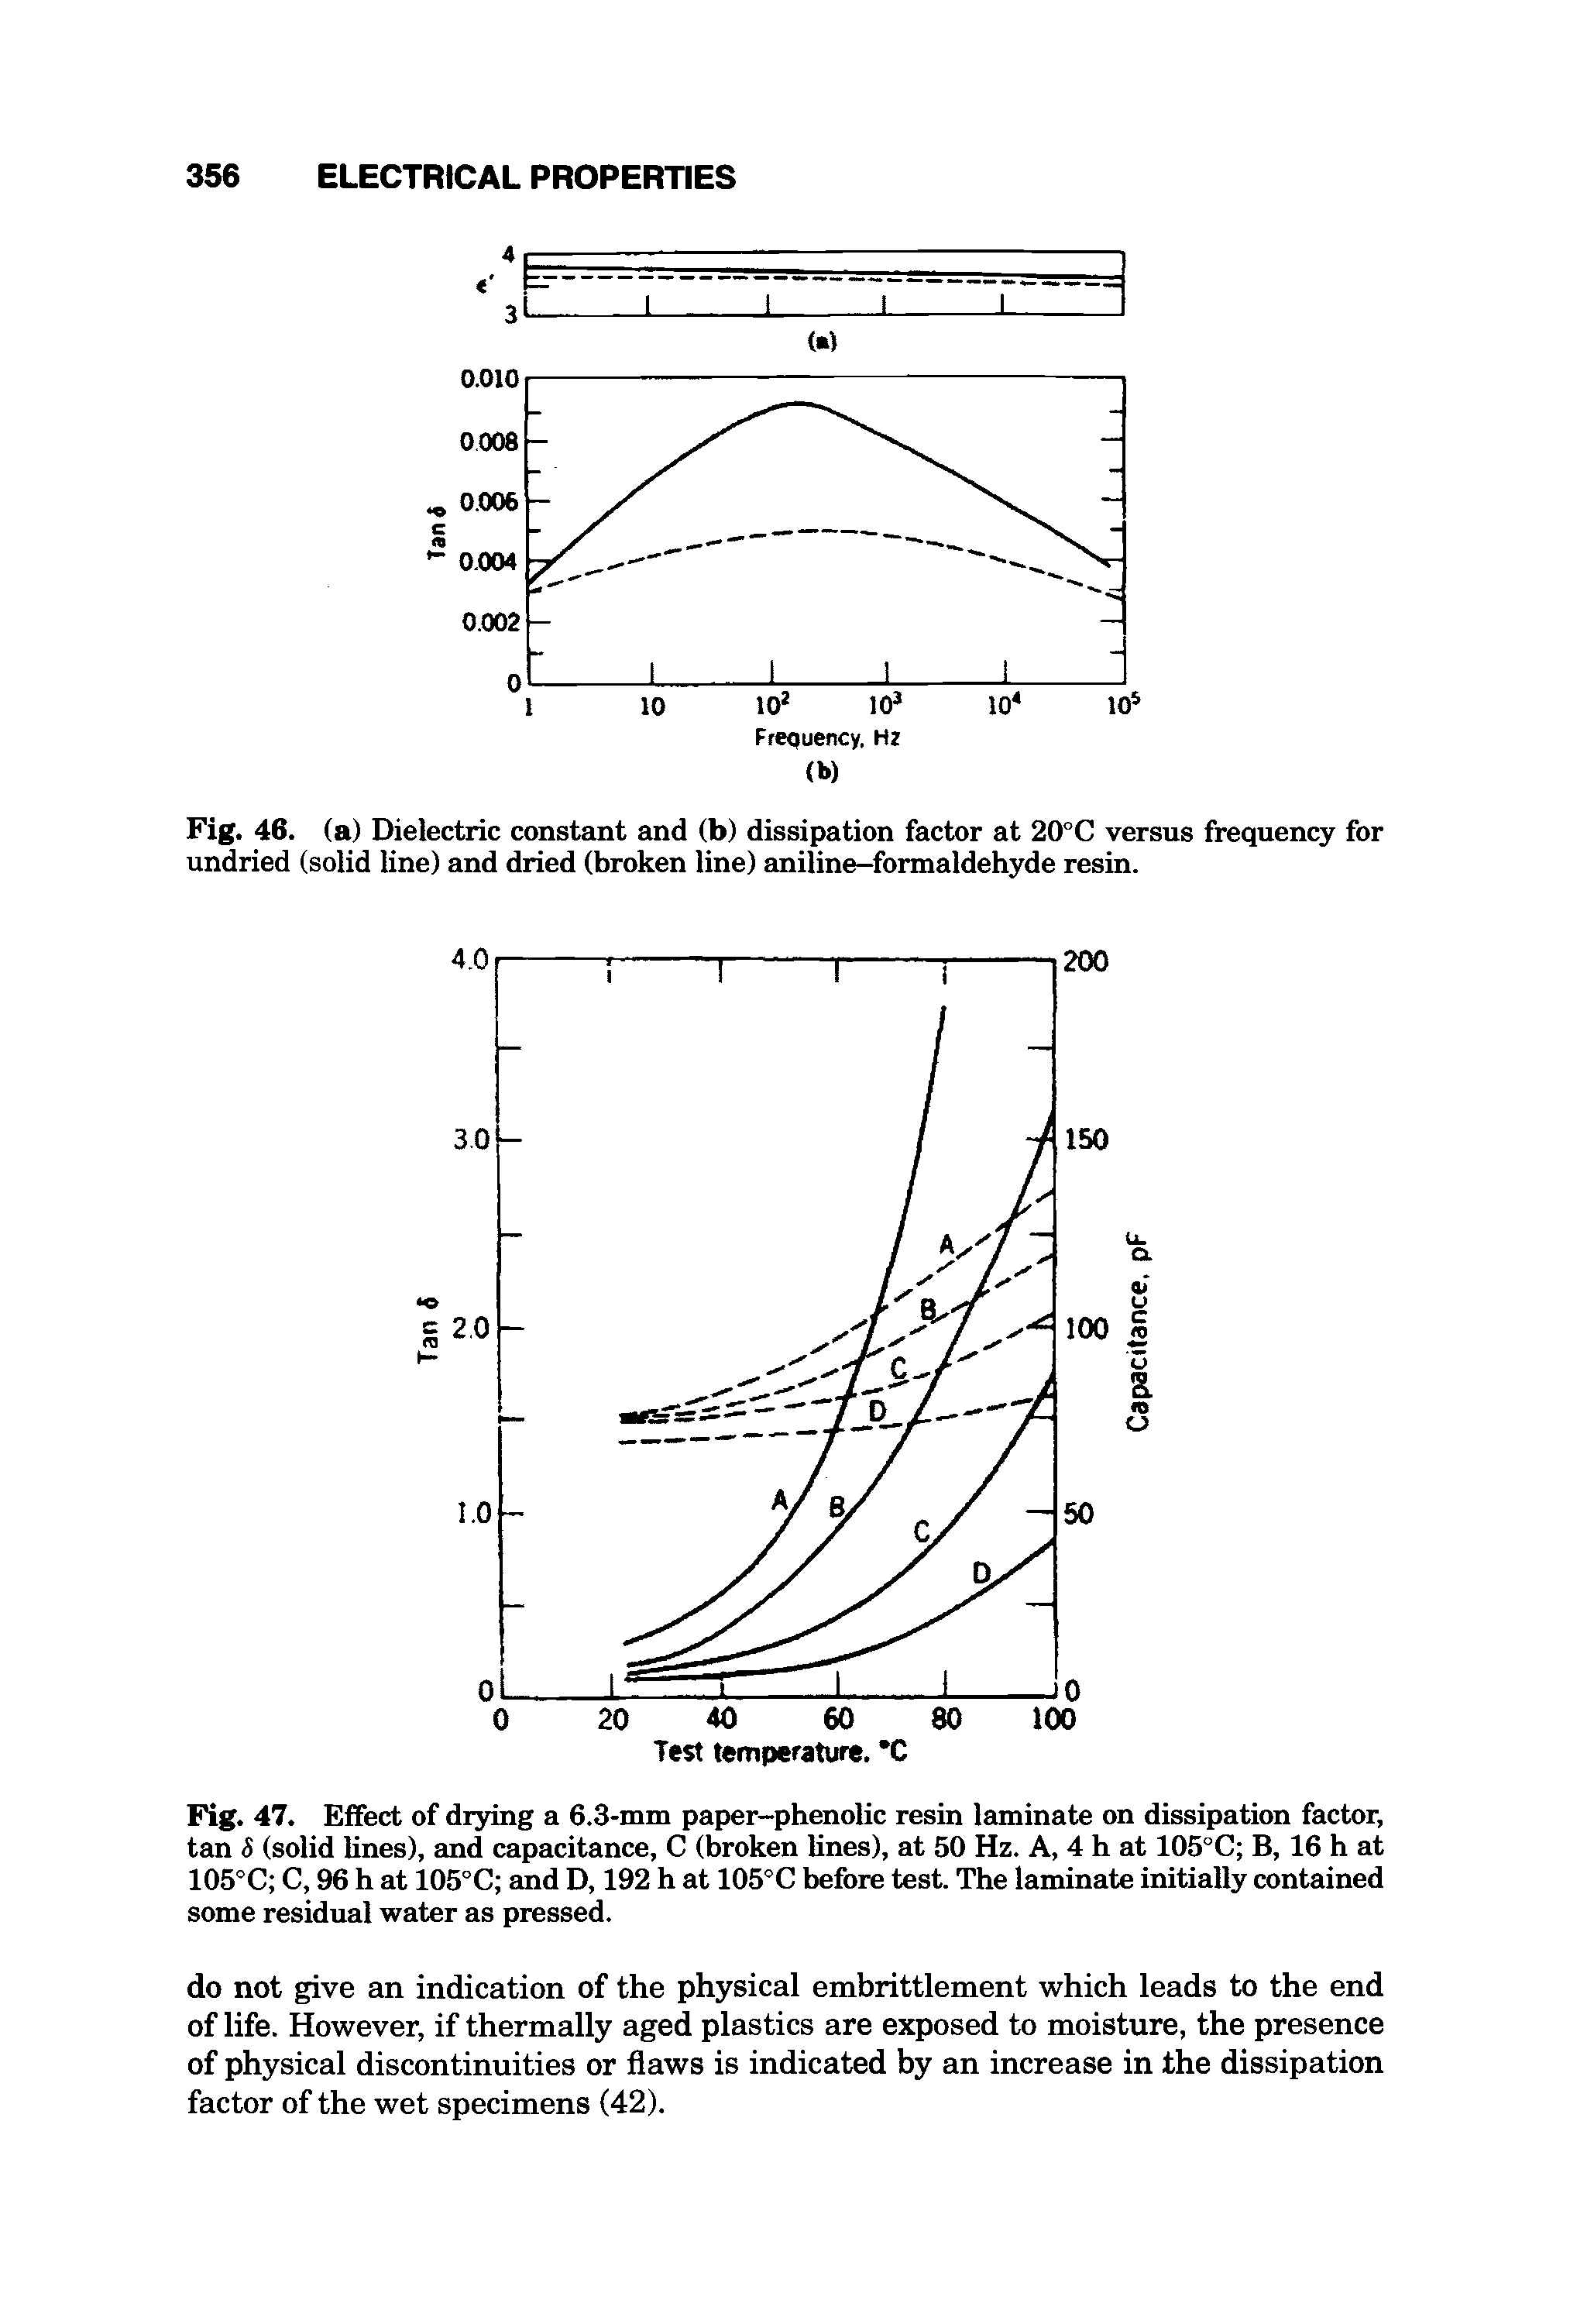 Fig. 47. Effect of diying a 6.3-mm paper-phenolic resin laminate on dissipation factor, tan S (solid lines), and capacitance, C (broken lines), at 50 Hz. A, 4 h at 105°C B, 16 h at 105°C C, 96 h at 105°C and D, 192 h at 105°C before test. The laminate initially contained some residual water as pressed.